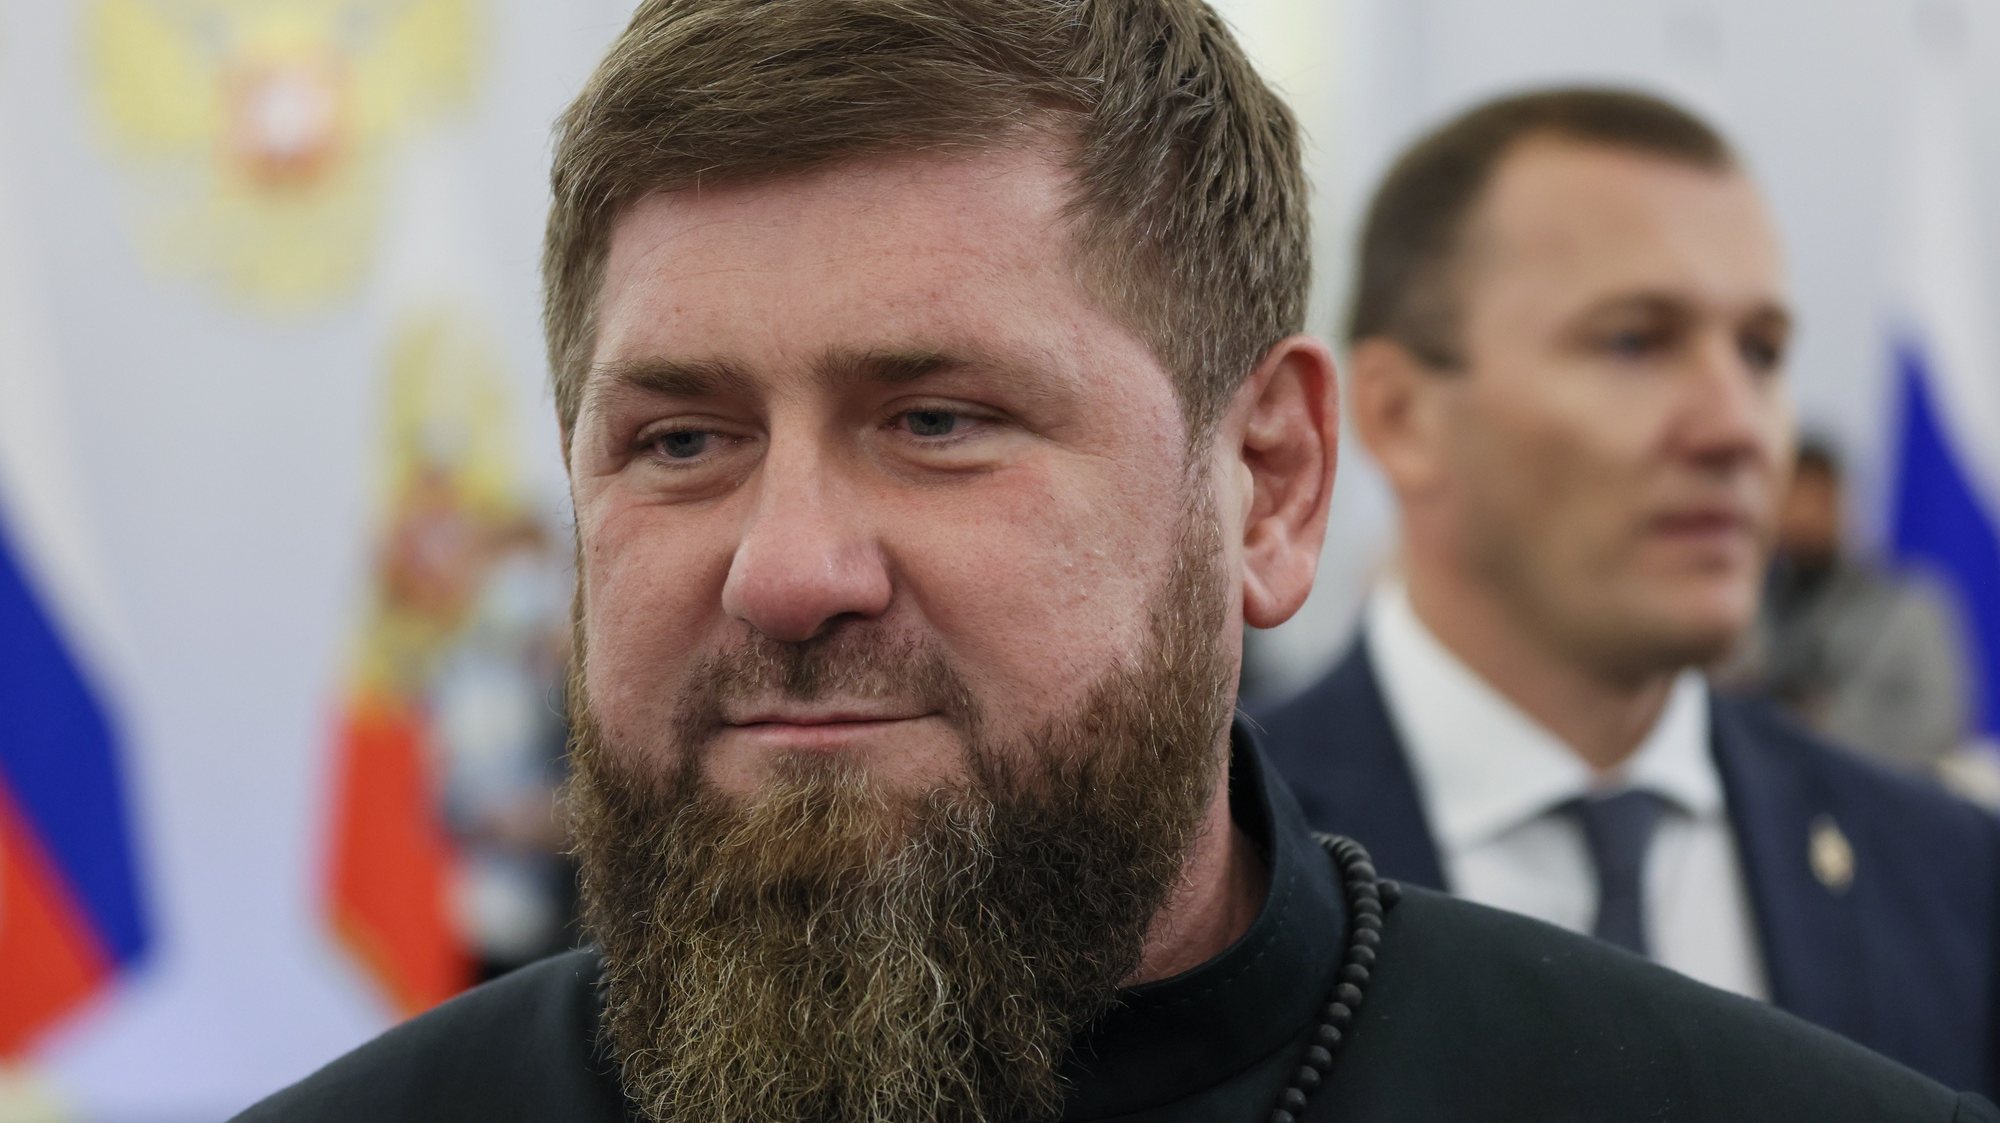 epa10215716 Chechnya&#039;s regional President Ramzan Kadyrov before a ceremony to sign treaties on new territories&#039; accession to Russia at the Grand Kremlin Palace in Moscow, Russia, 30 September 2022. From 23 to 27 September, residents of the self-proclaimed Luhansk and Donetsk People&#039;s Republics as well as the Russian-controlled areas of the Kherson and Zaporizhzhia regions of Ukraine voted in a so-called &#039;referendum&#039; to join the Russian Federation.  EPA/MIKHAIL METZEL/SPUTNIK/KREMLIN POOL MANDATORY CREDIT